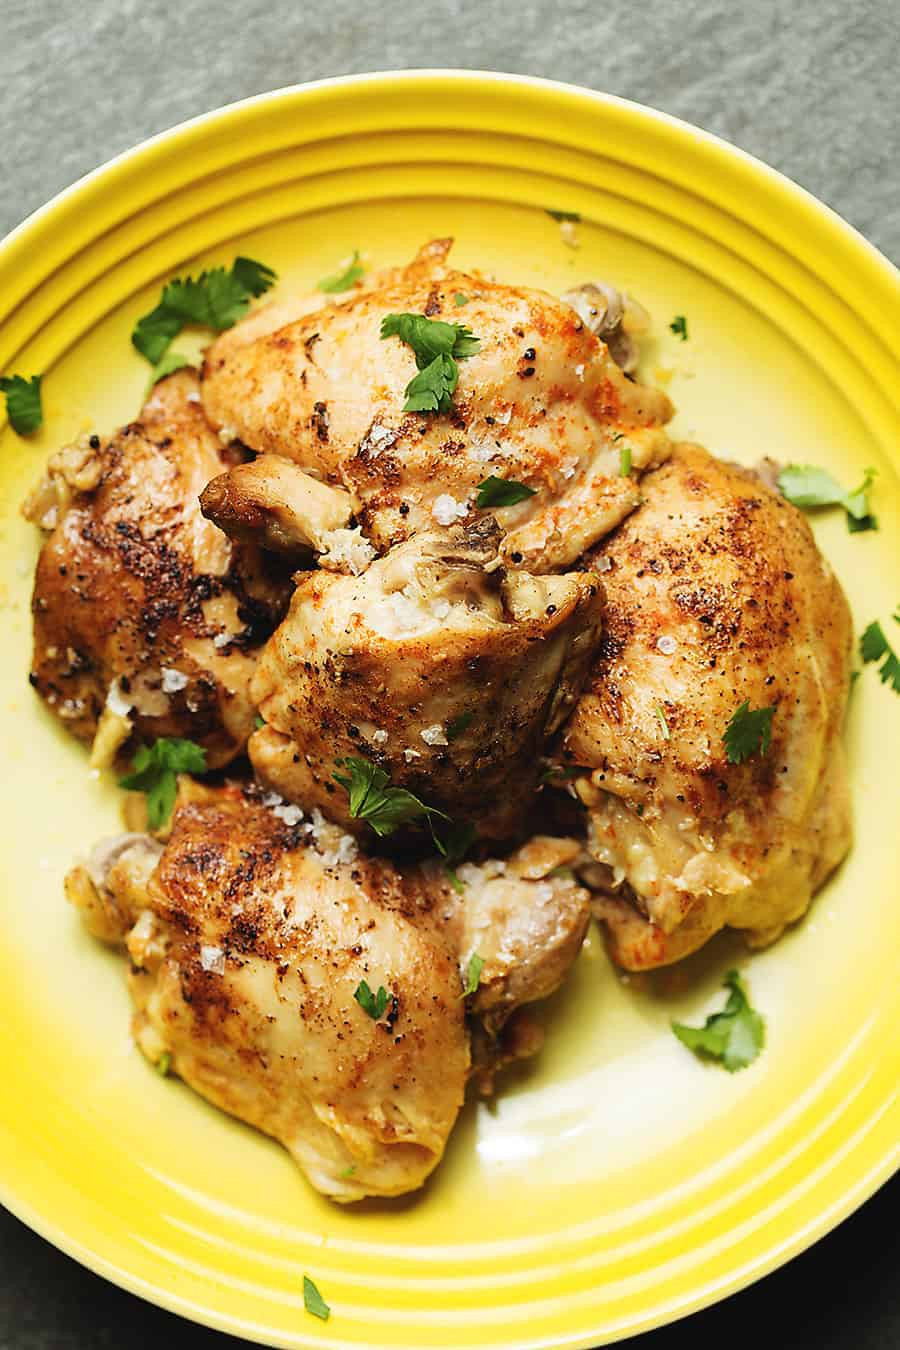 Instant Pot Chicken Thighs Bone In
 Instant Pot Chicken Thighs • Low Carb with Jennifer